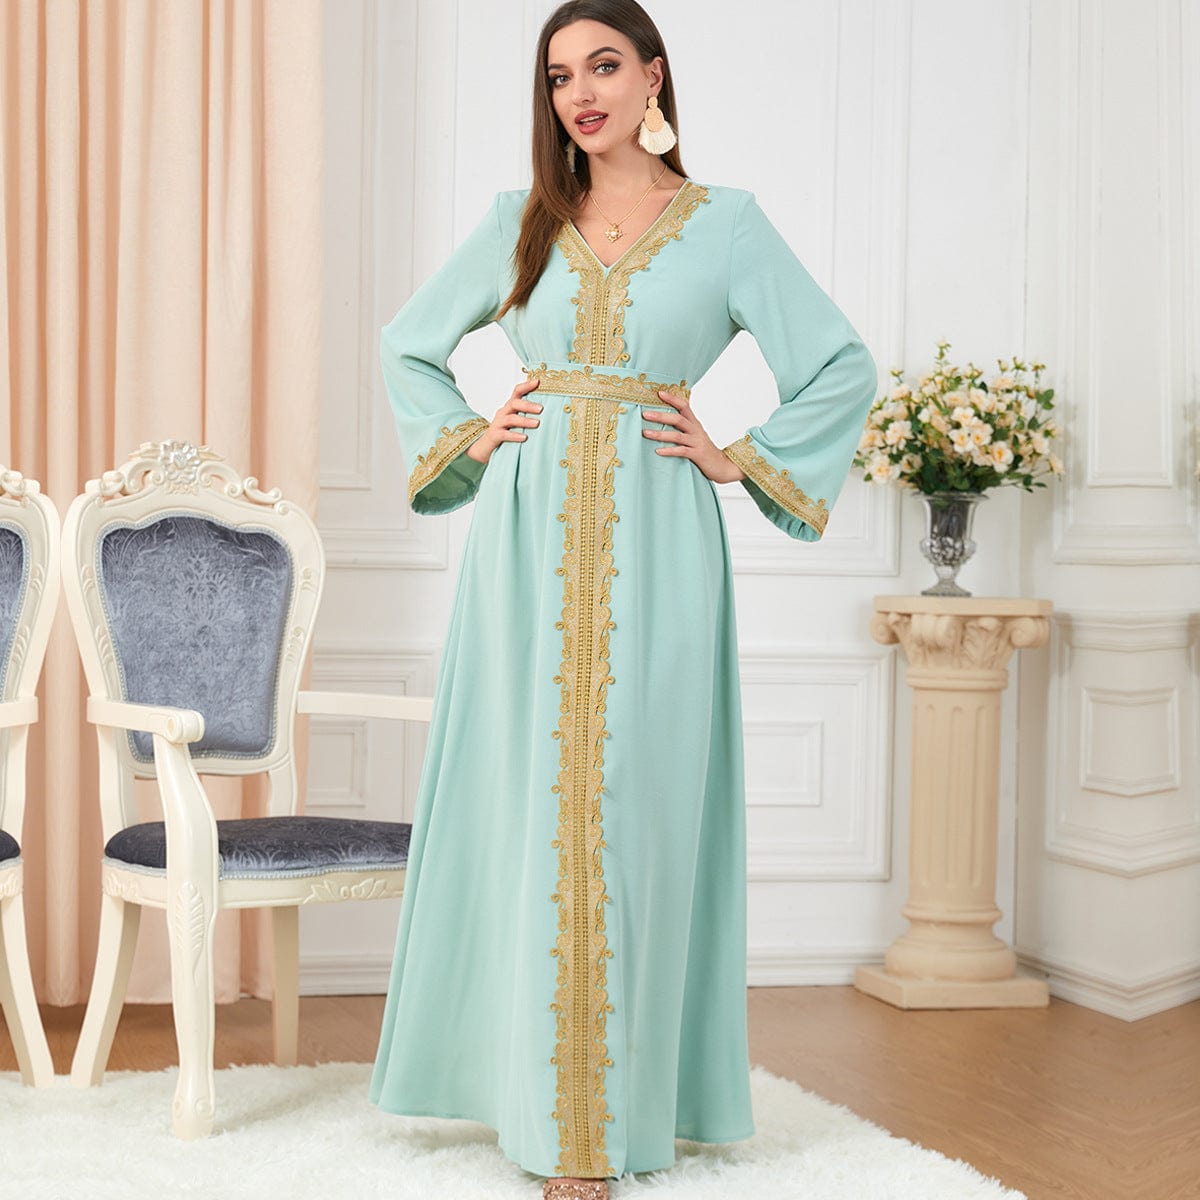 a woman wearing Light Green solid color embroidery long-sleeved dress full length view